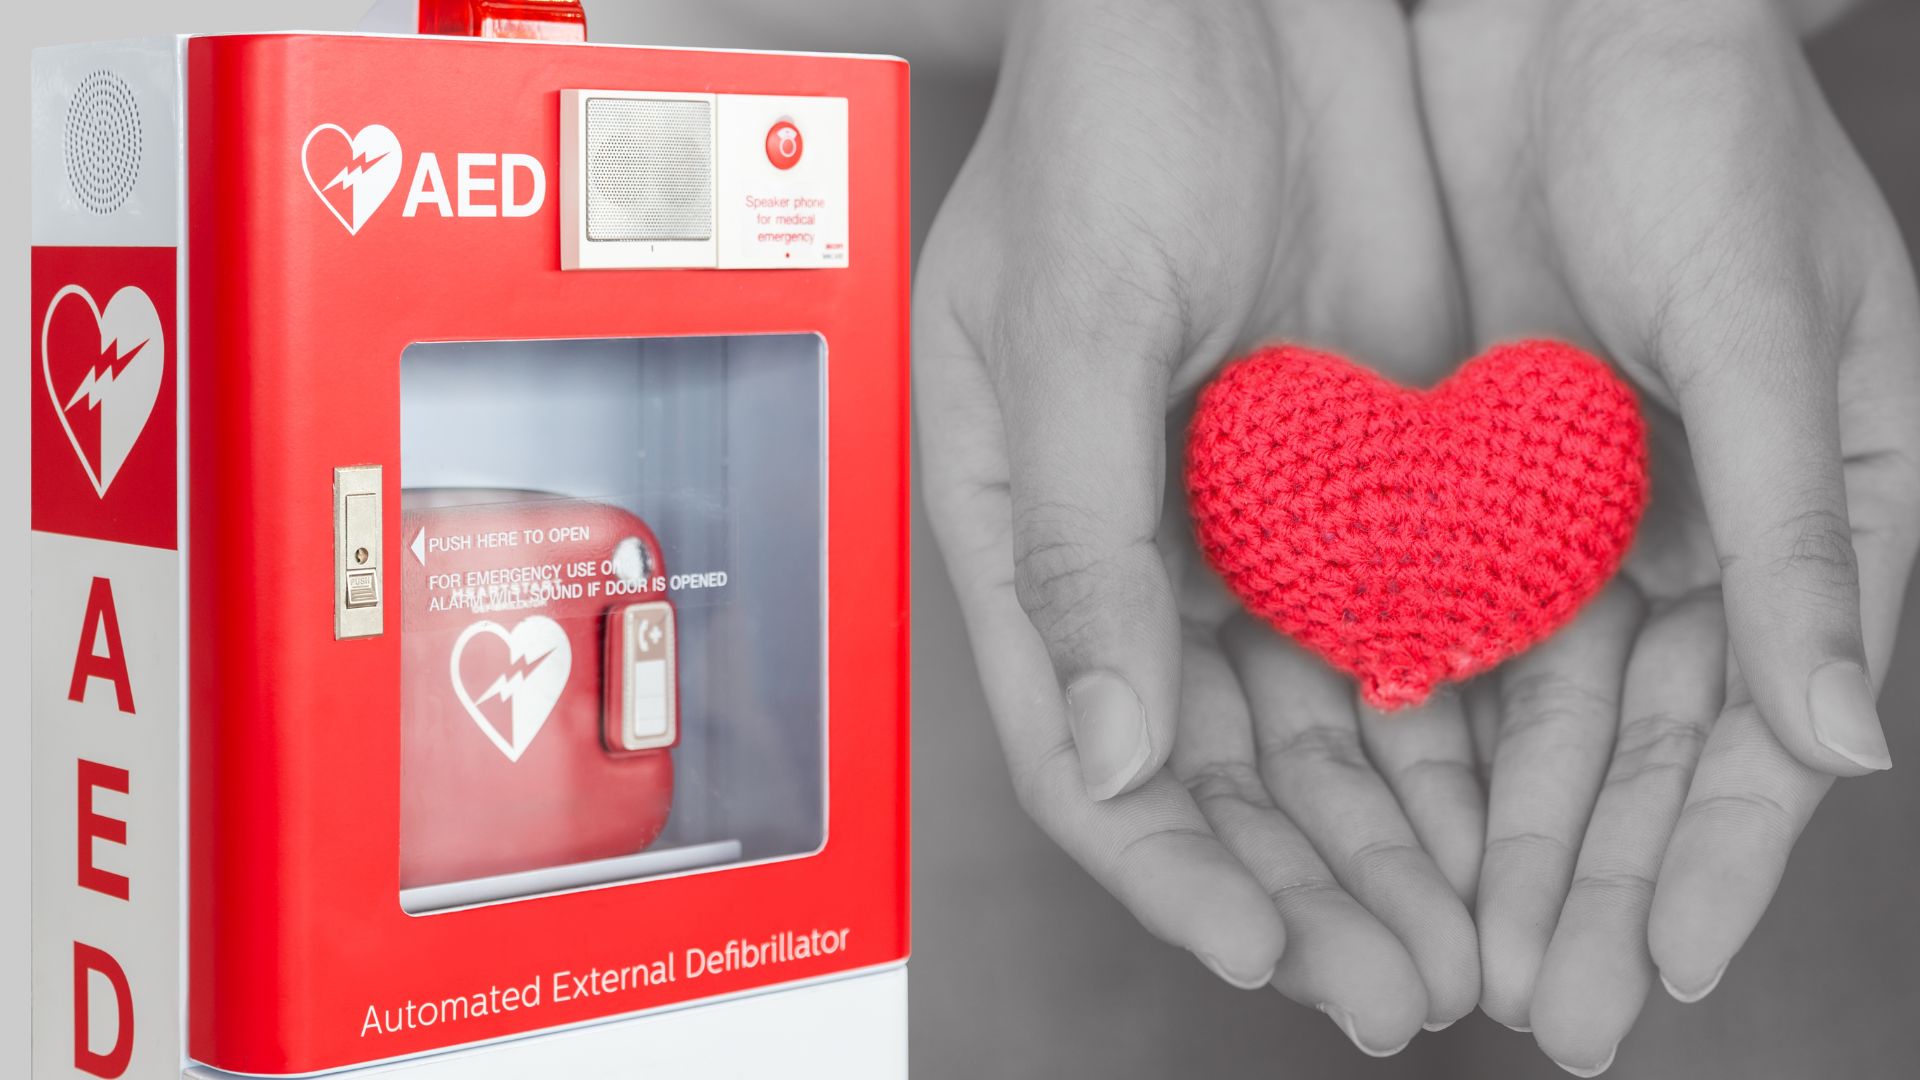 AED and crocheted heart